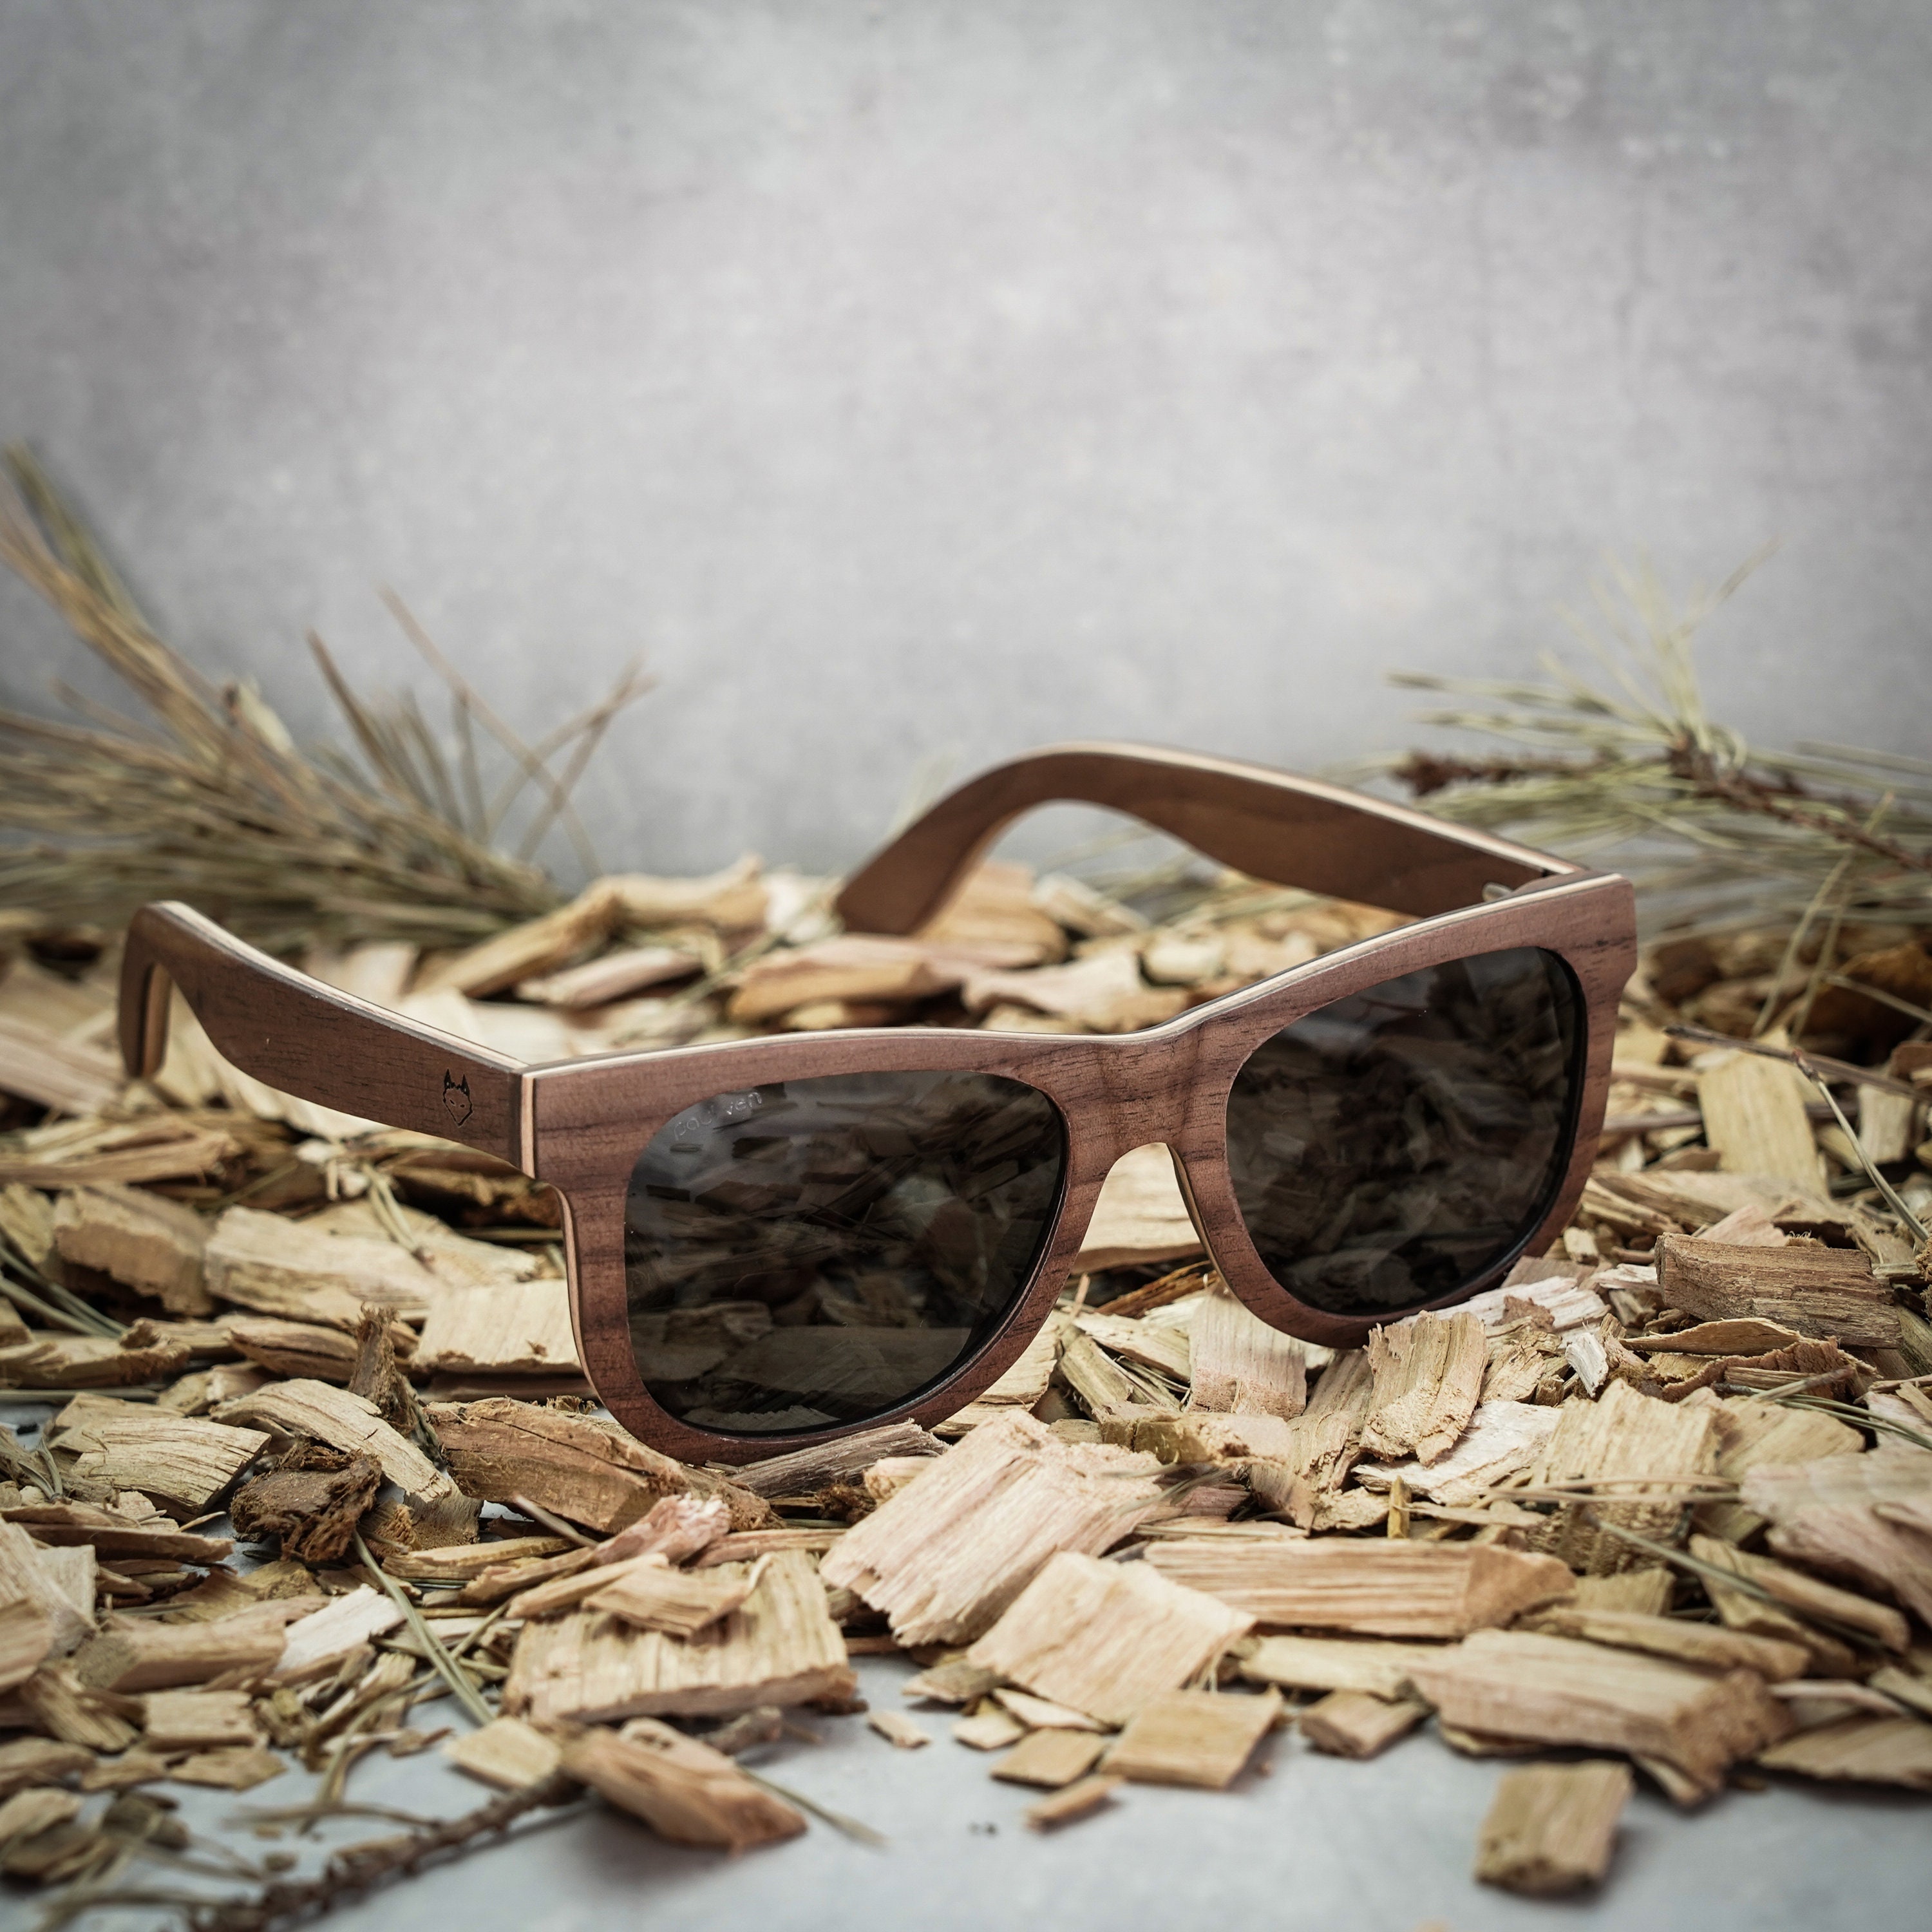 Why Choose Wooden Sunglasses? 10 Wooden Sunglasses Benefits – Kraywoods